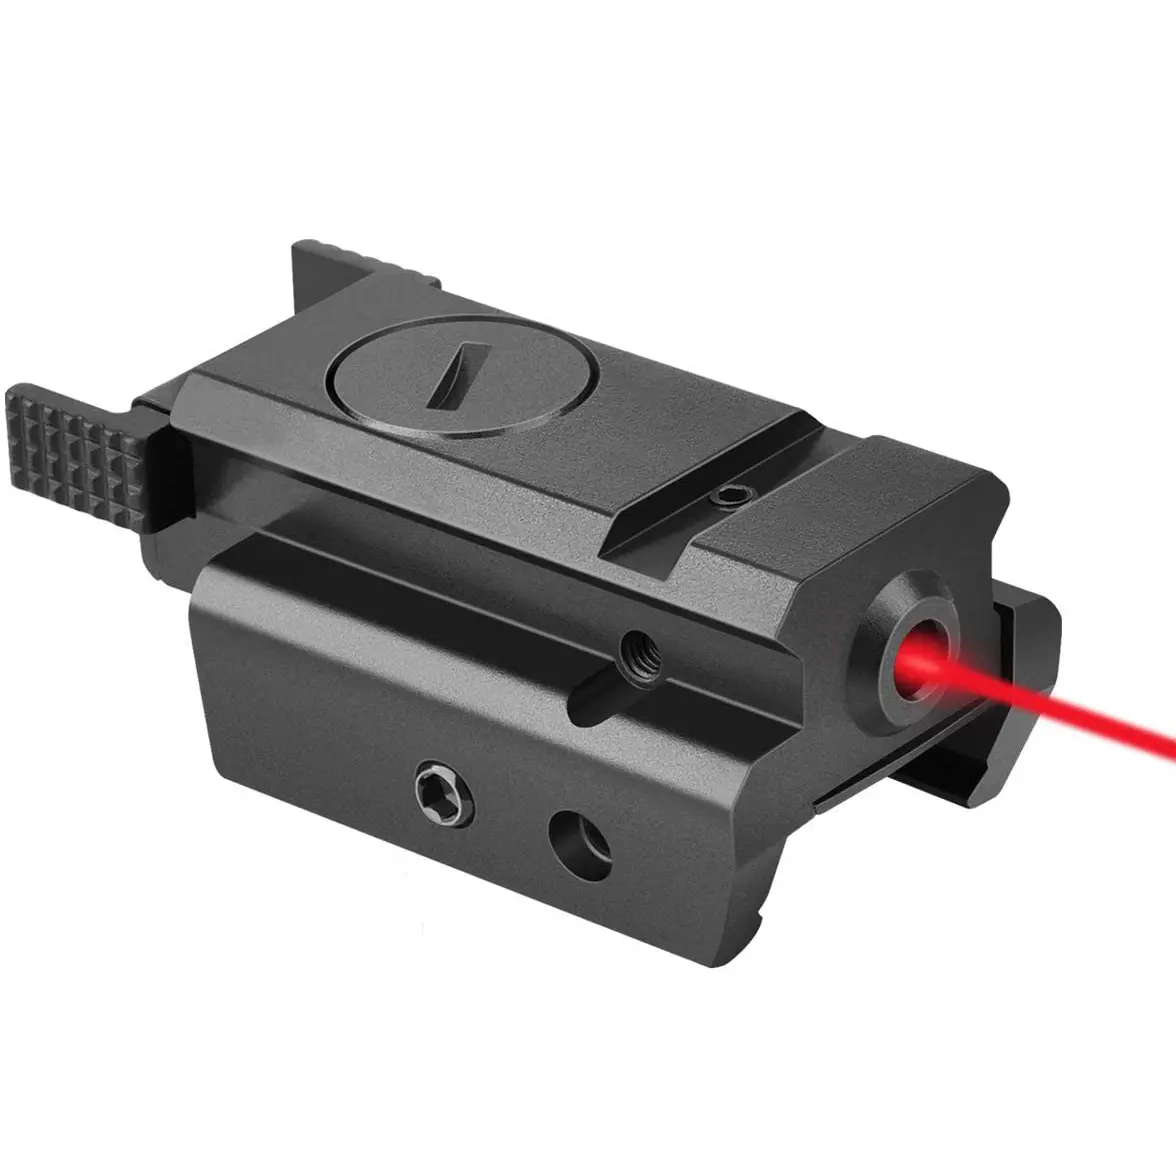 Laser Sight Tactical Red Dot Scope For Hunting Adjustable Hunting Scopes